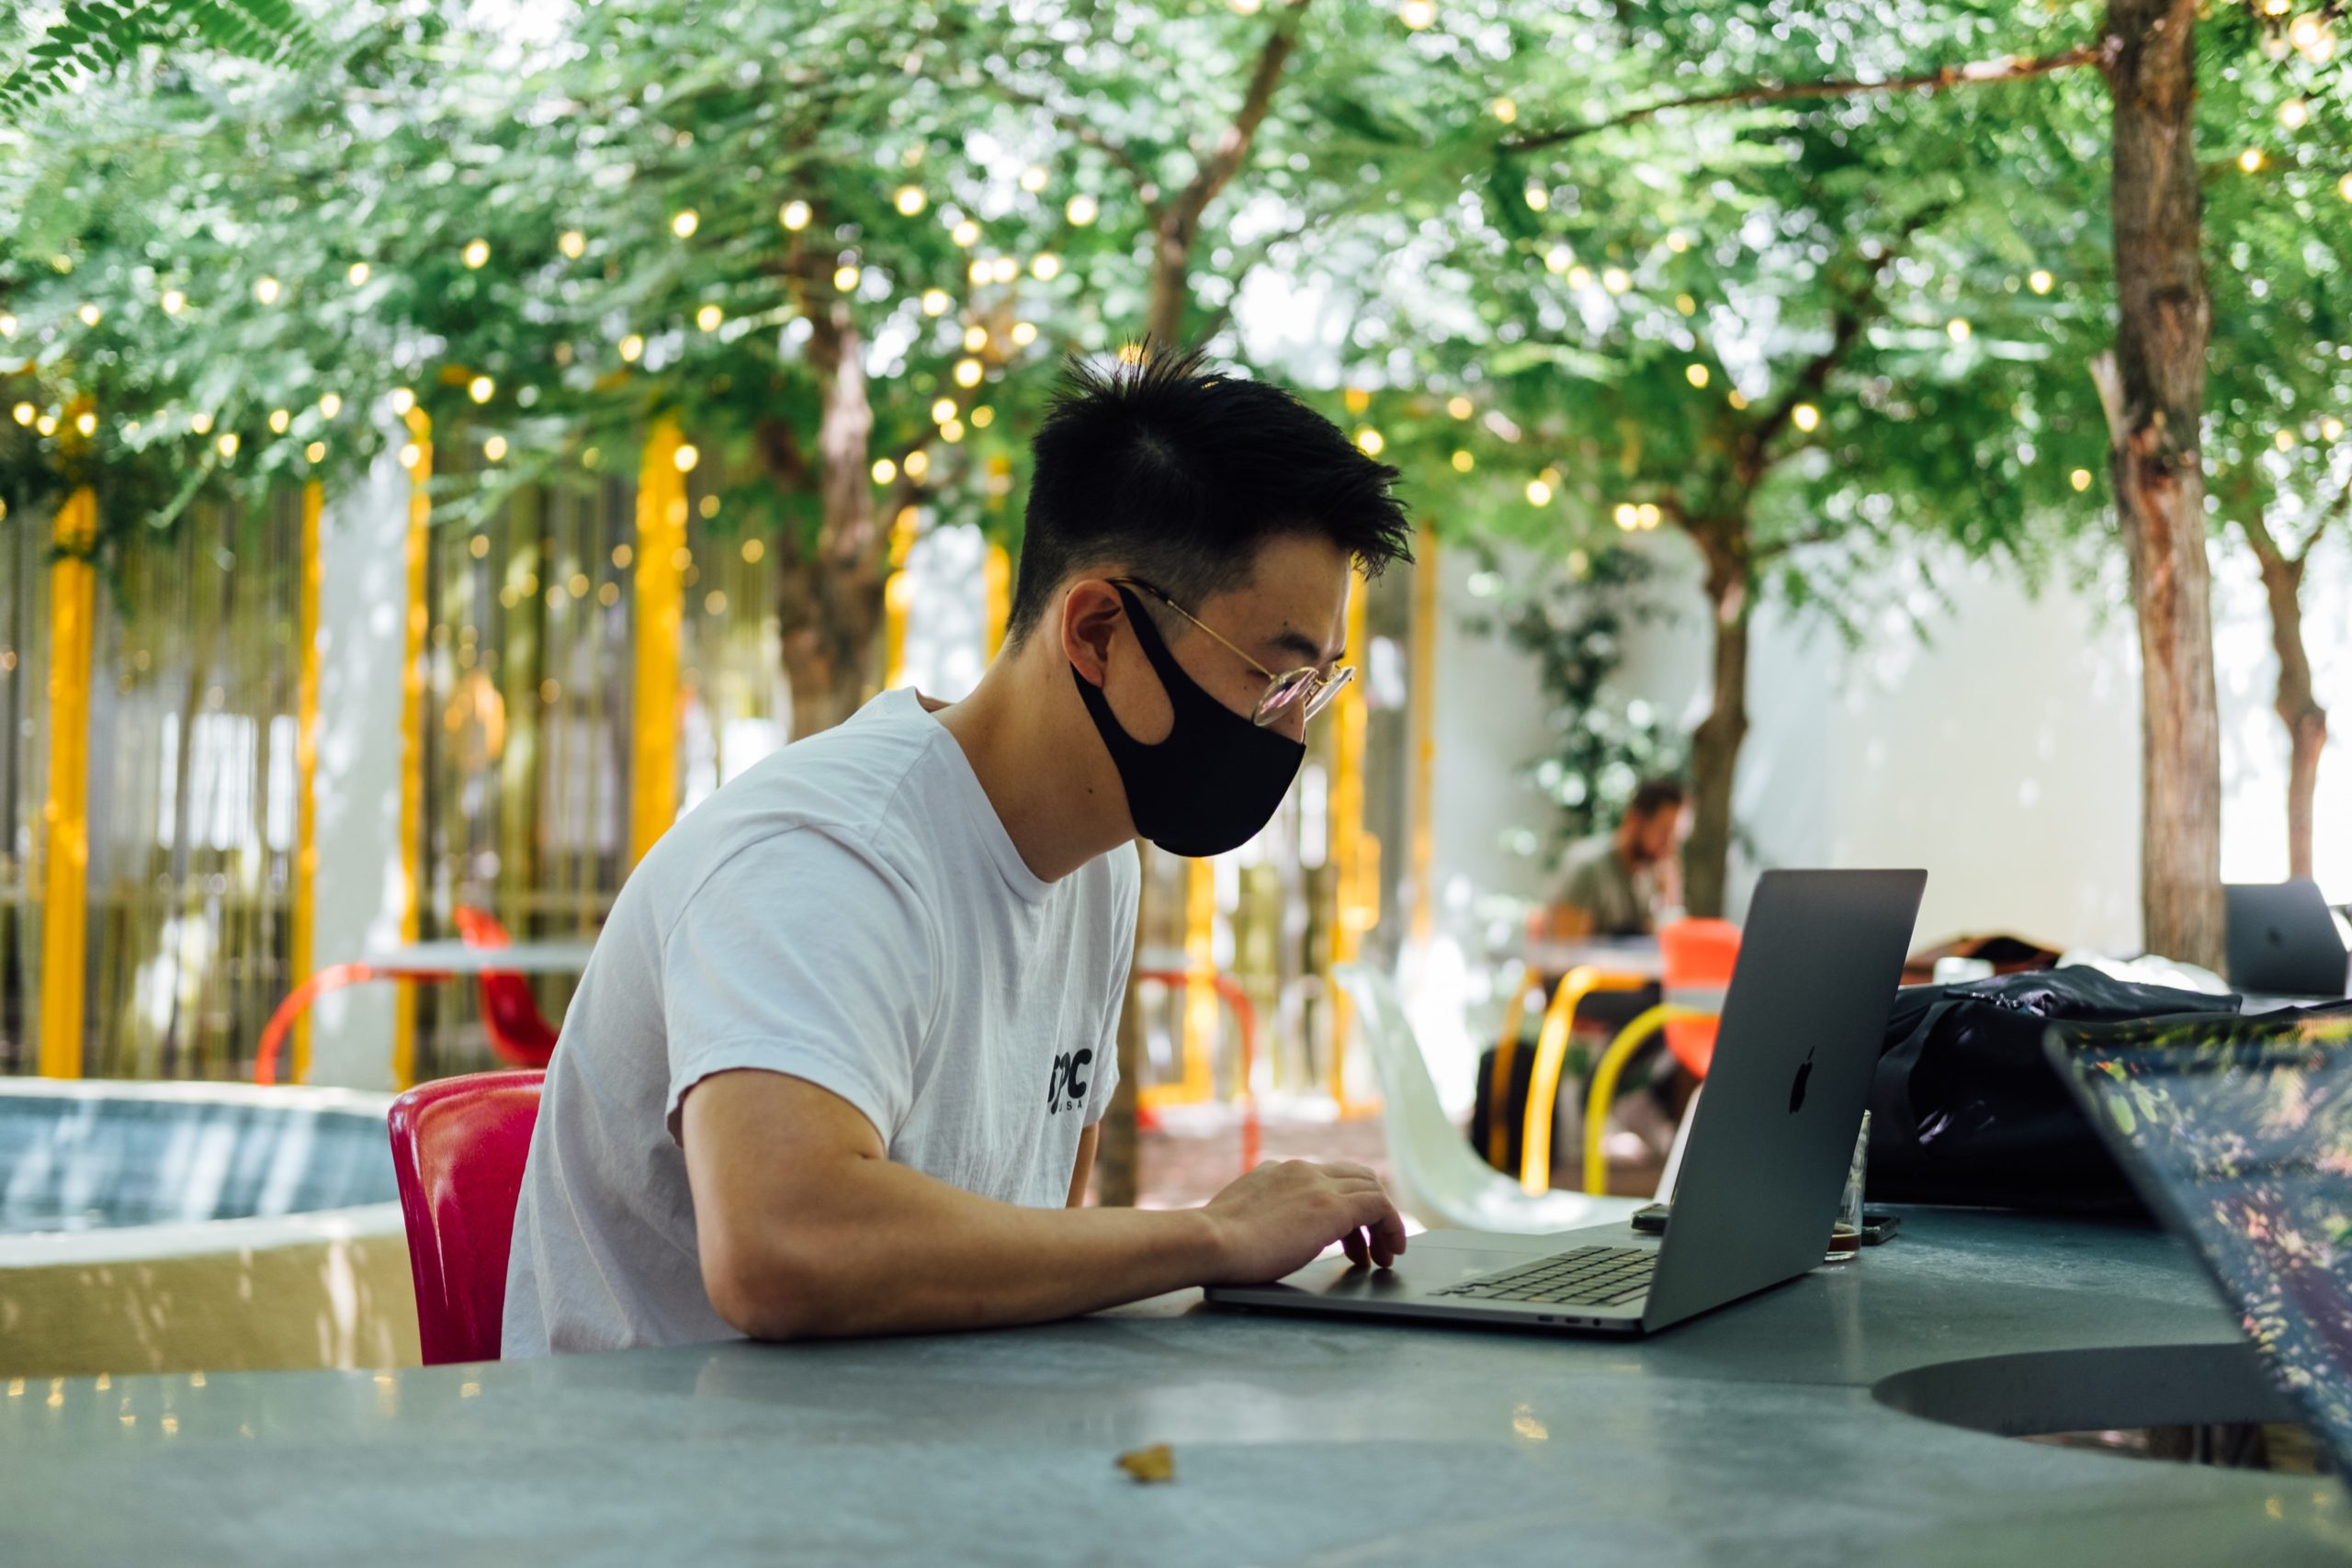 A young male sitting outside at a table wearing a black face mask working on his computer, surrounded by a few trees with lights on them.